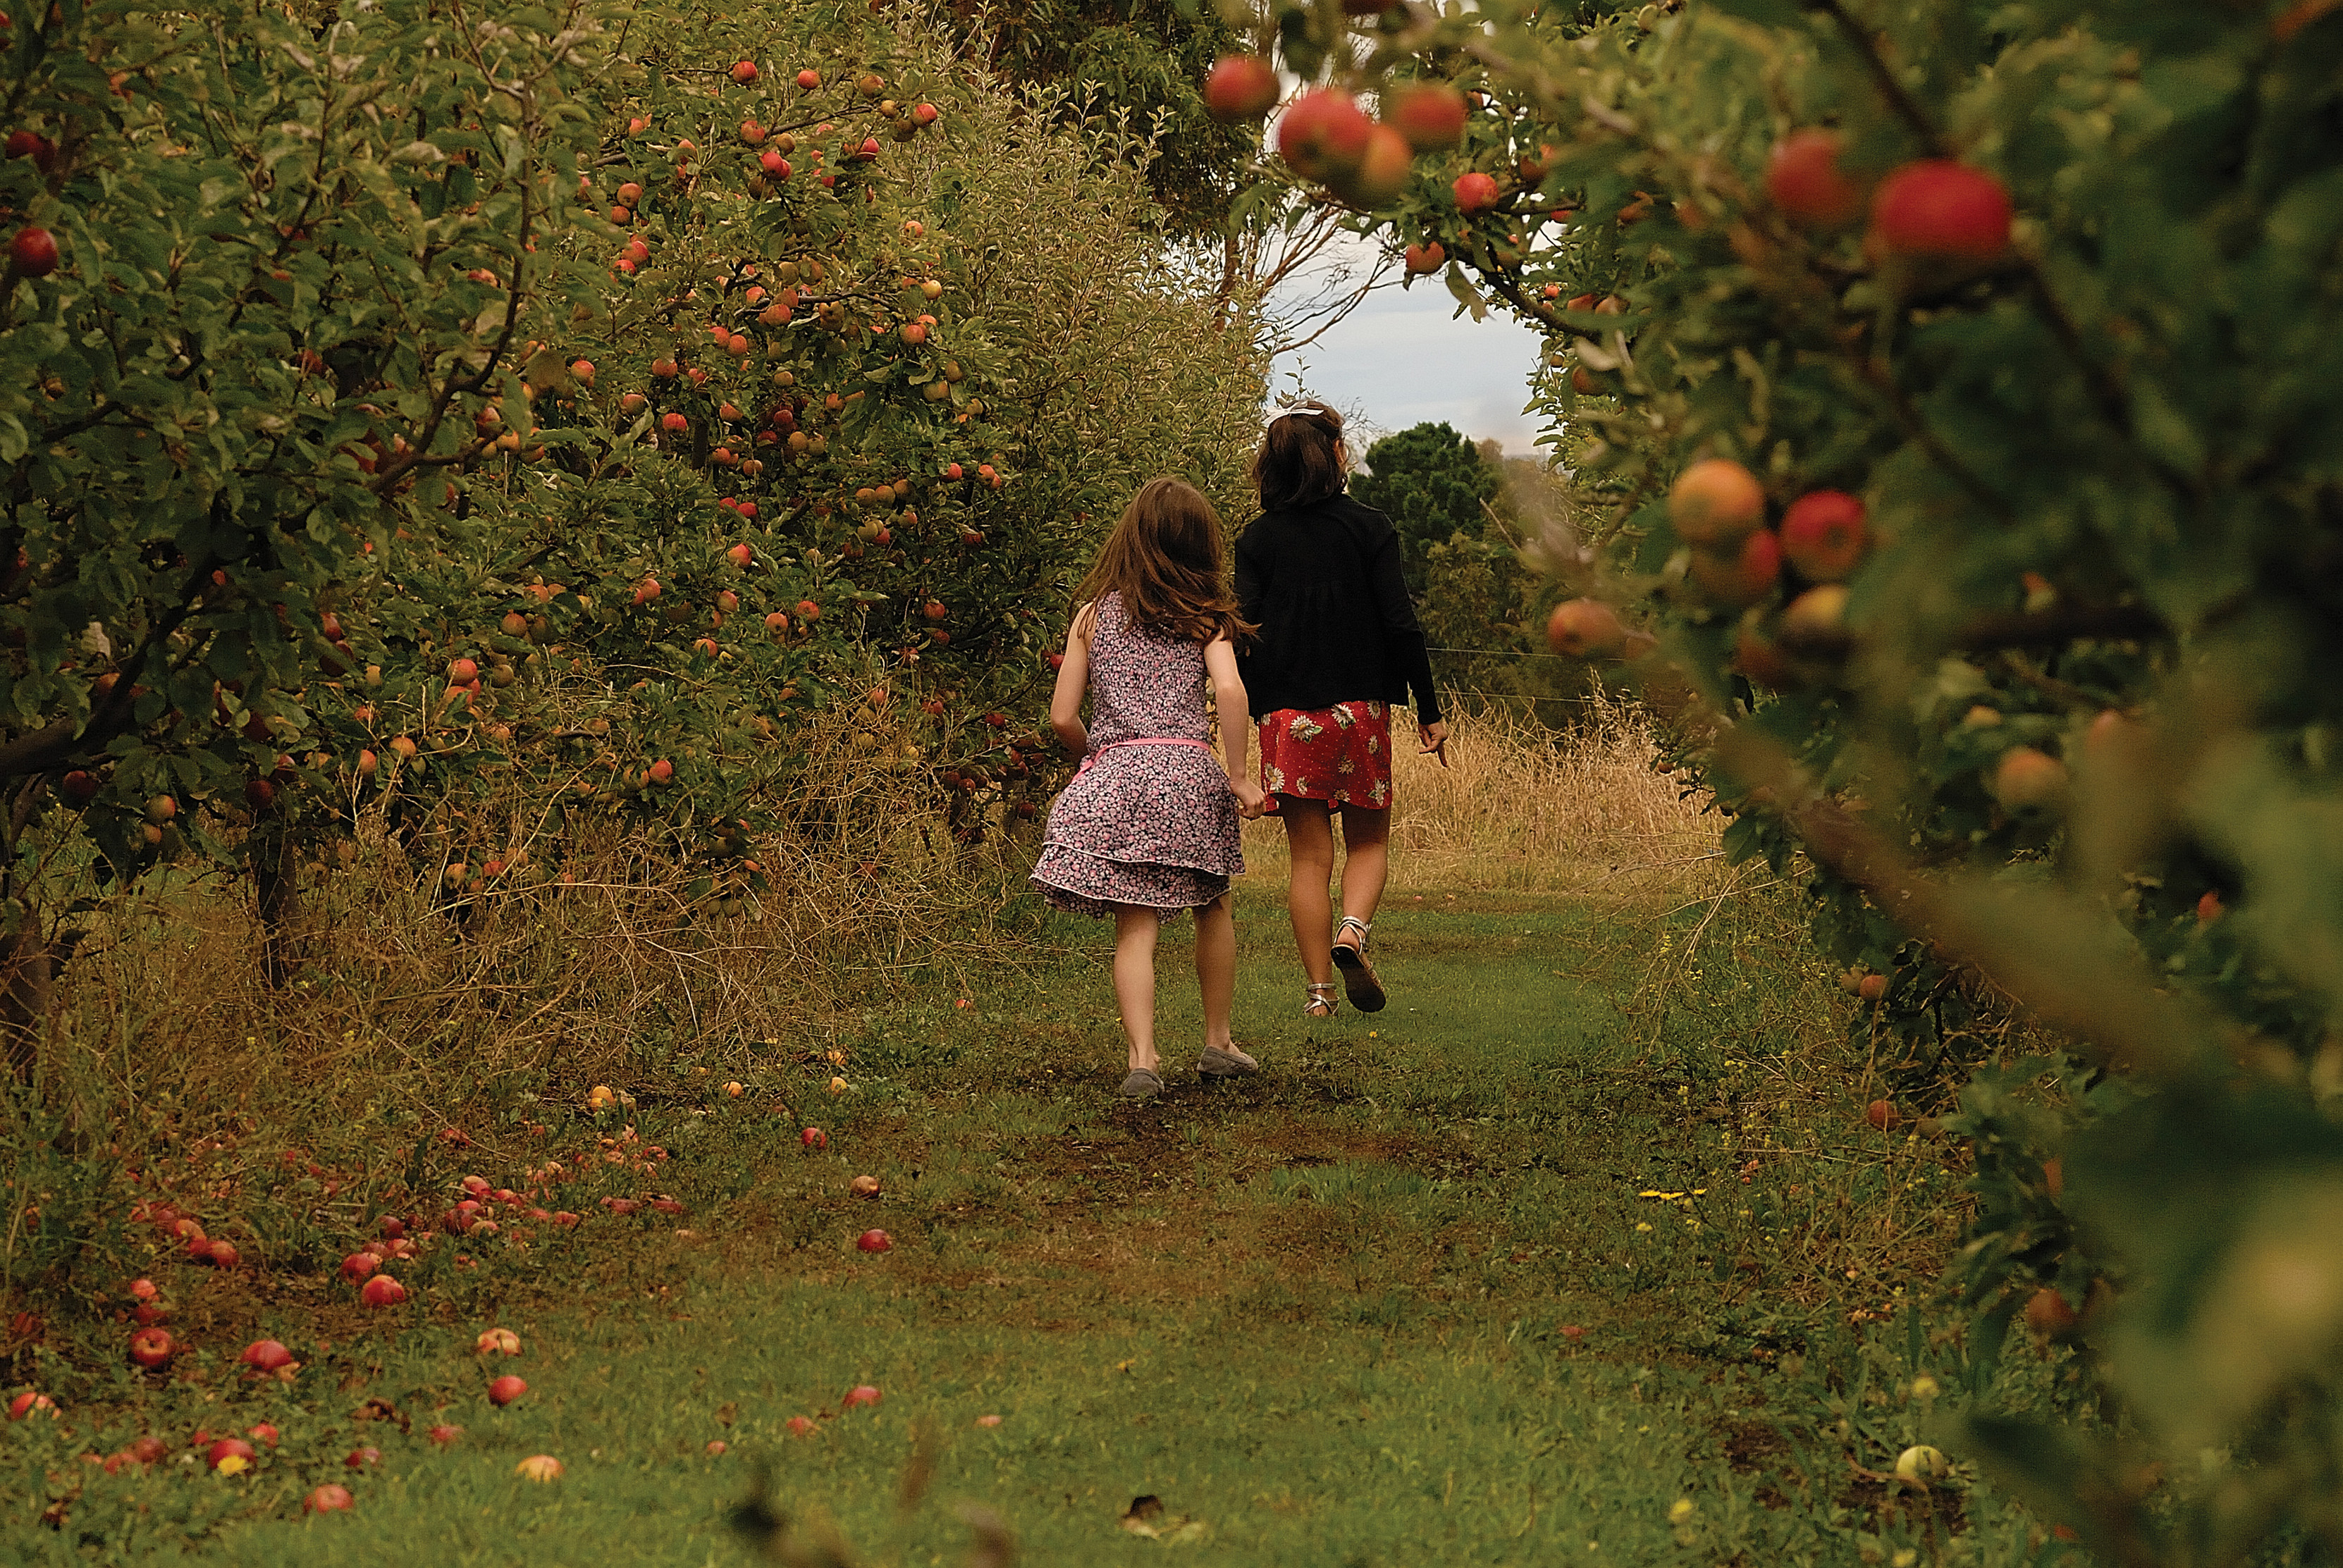 Two children skip between the fruit trees at Sorell Fruit Farm, fruit is all over the trees and fallen to the floow around them.